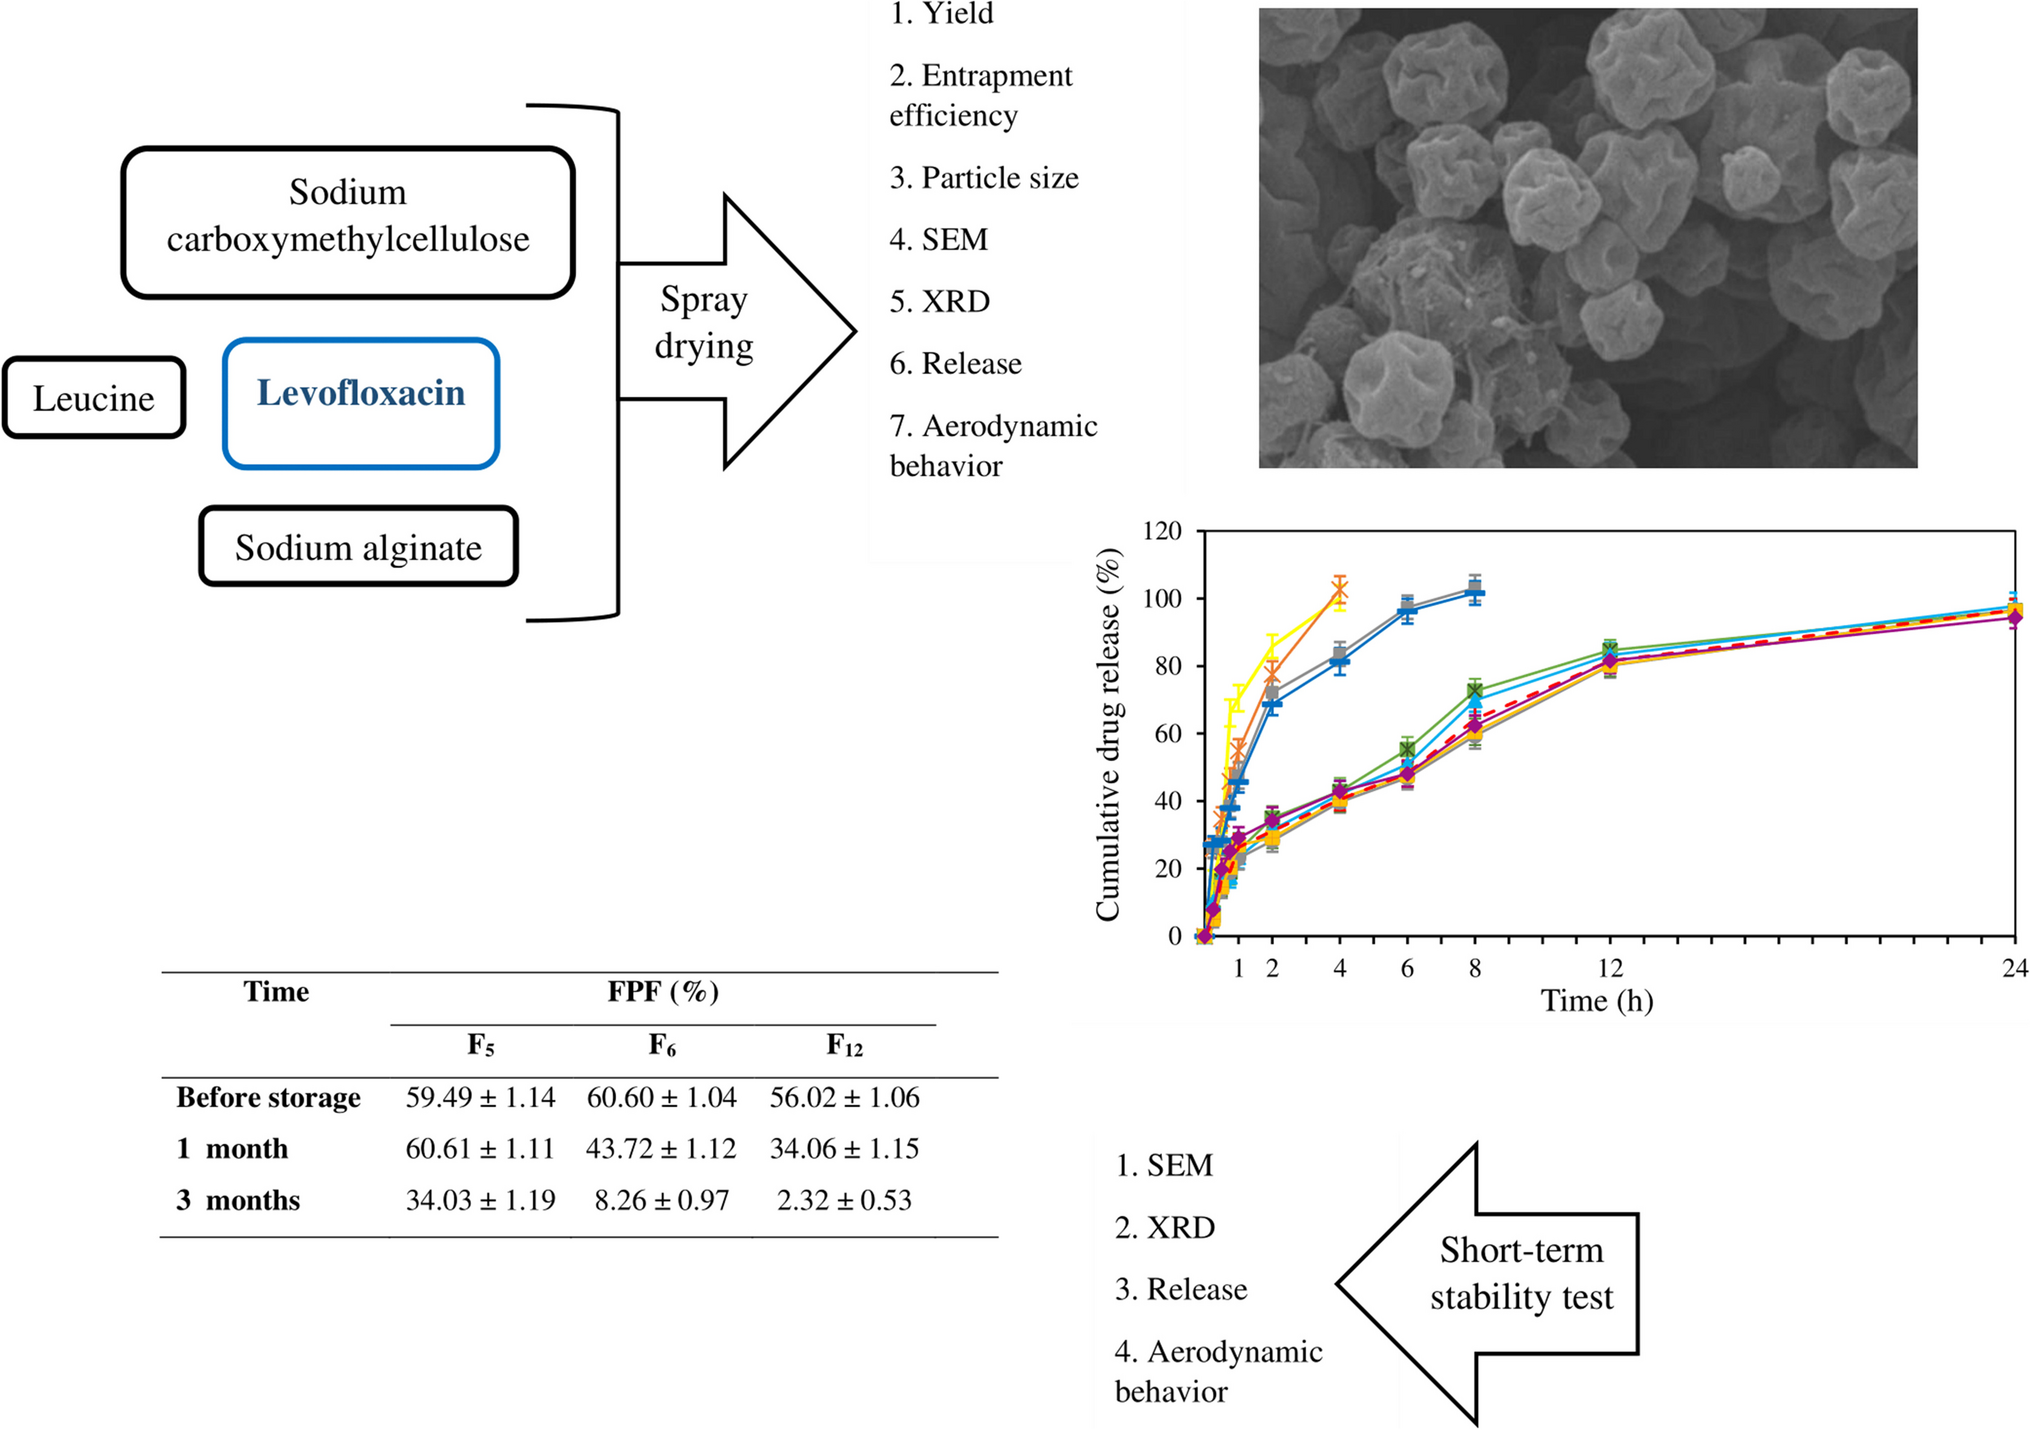 Evaluating the effect of sodium alginate and sodium carboxymethylcellulose on pulmonary delivery of levofloxacin spray-dried microparticles